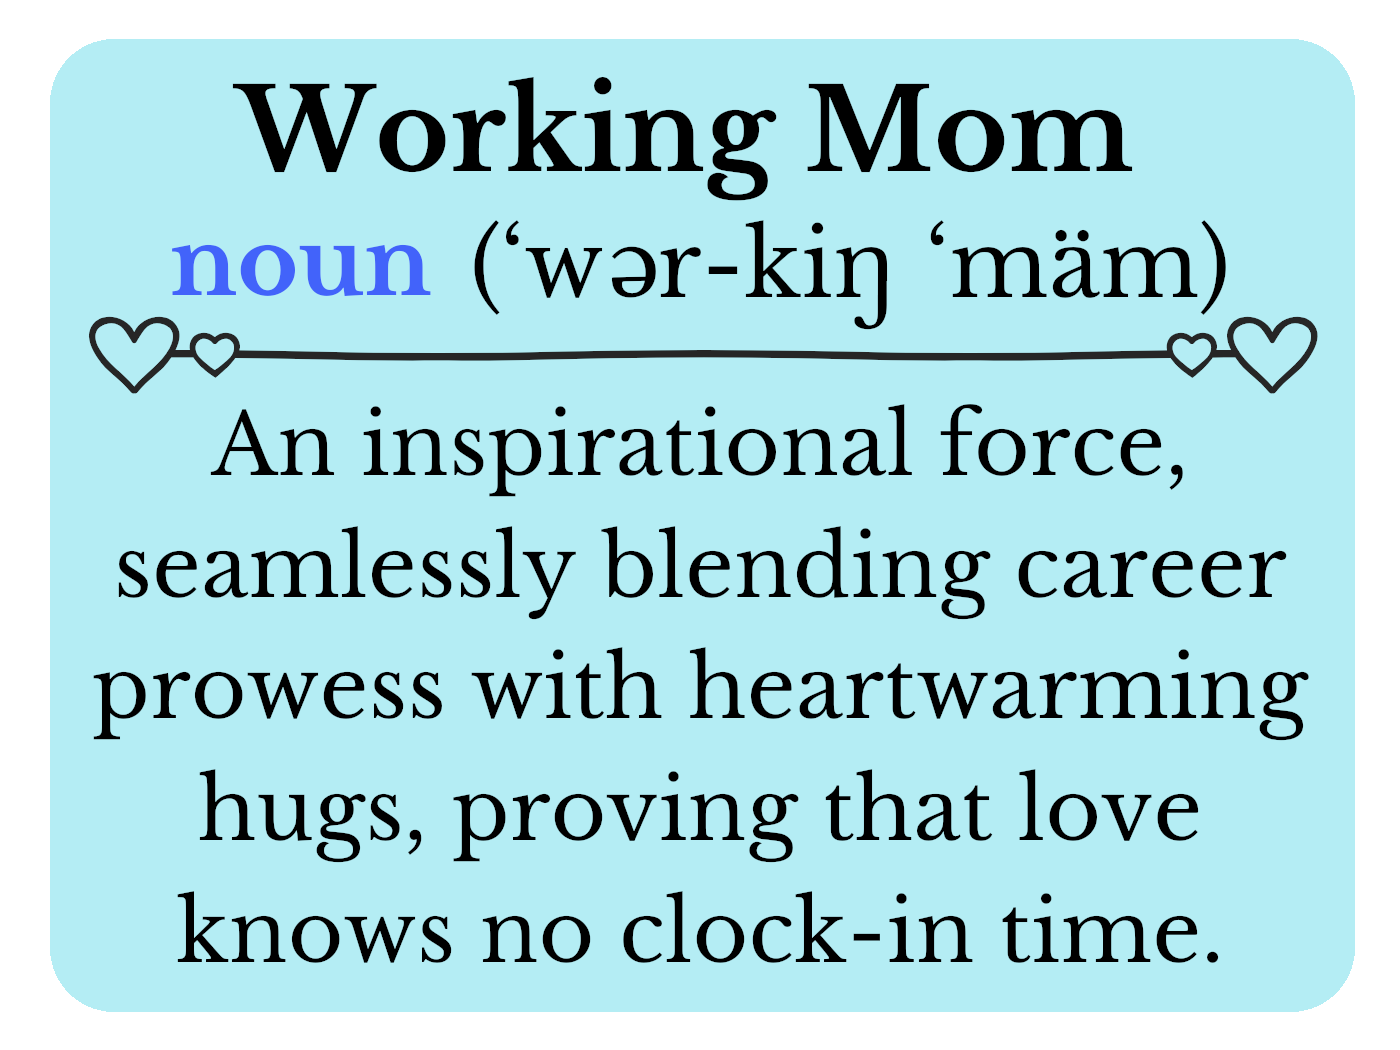 Working Mom Defined